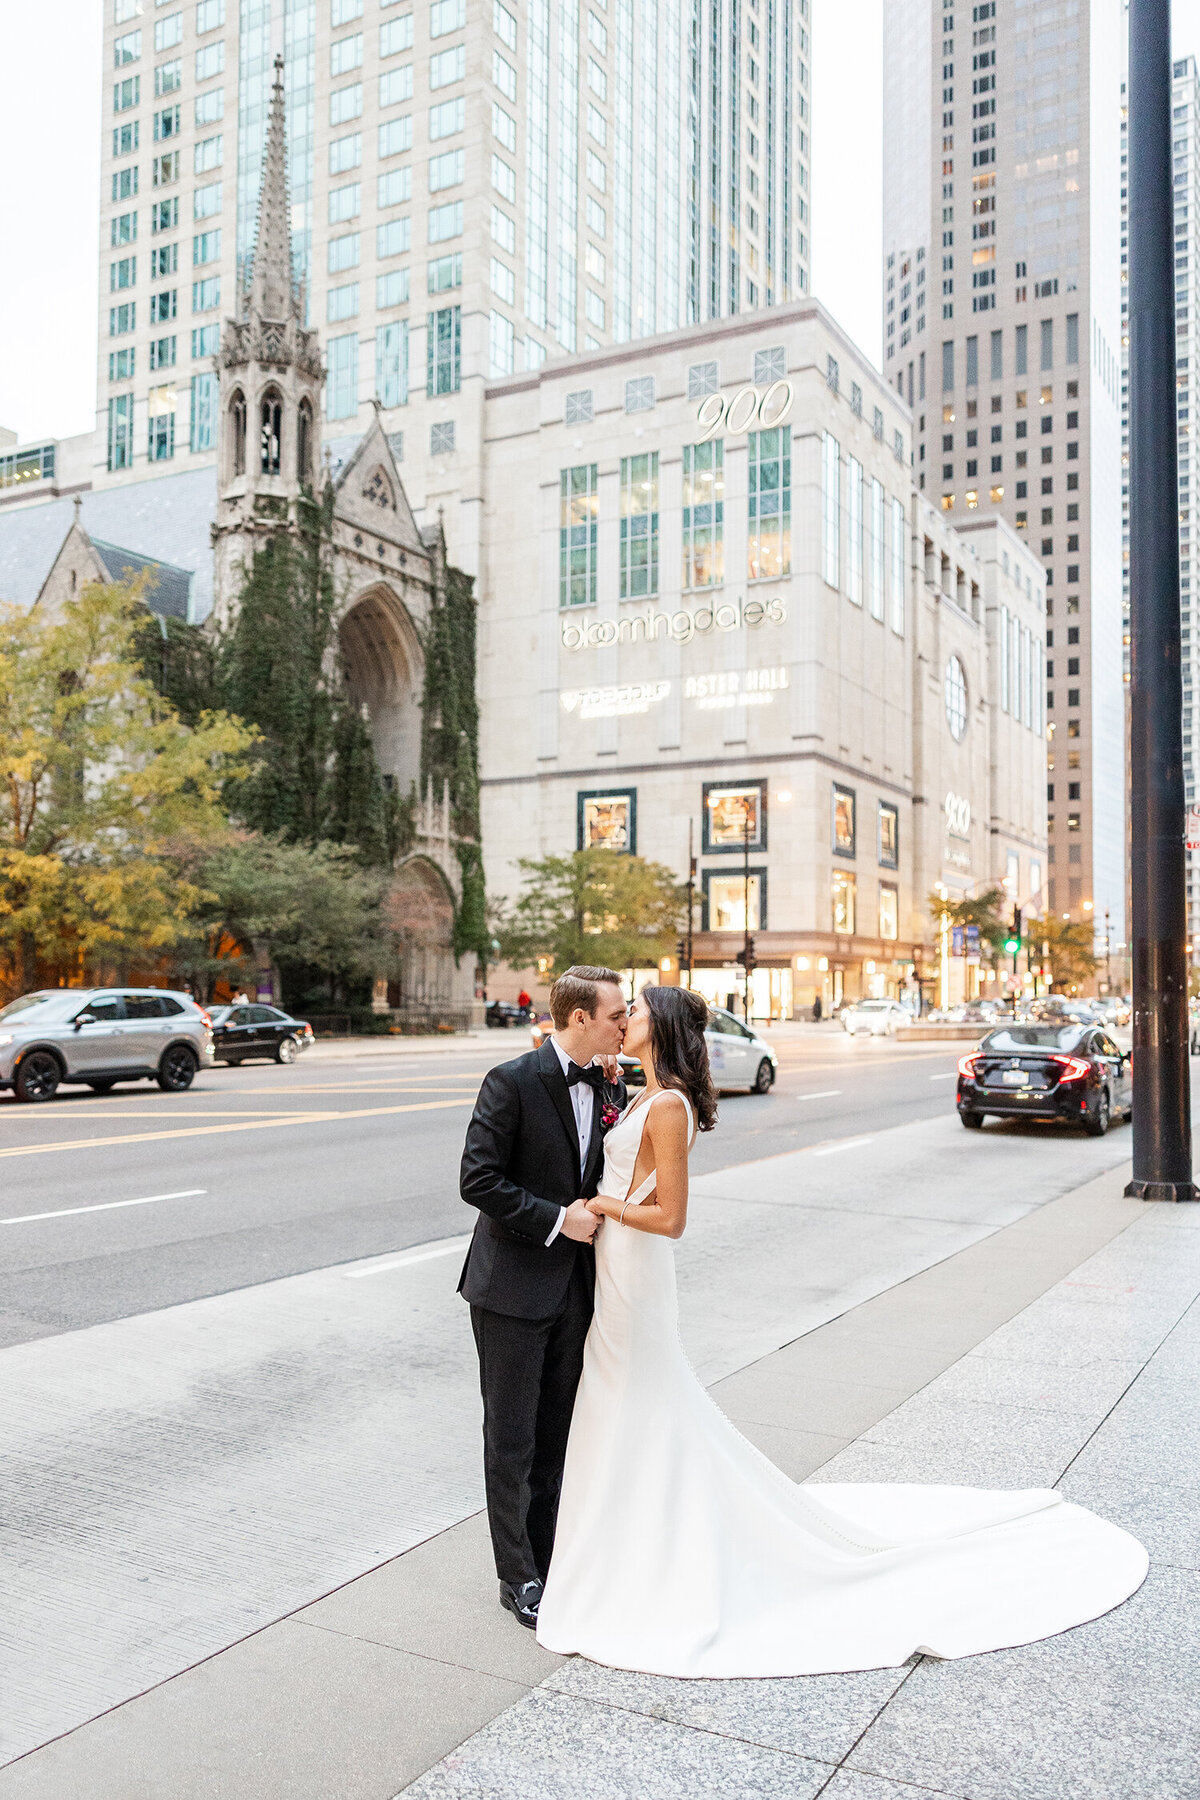 Bride and groom kissing on a city sidewalk with a church and buildings in the background